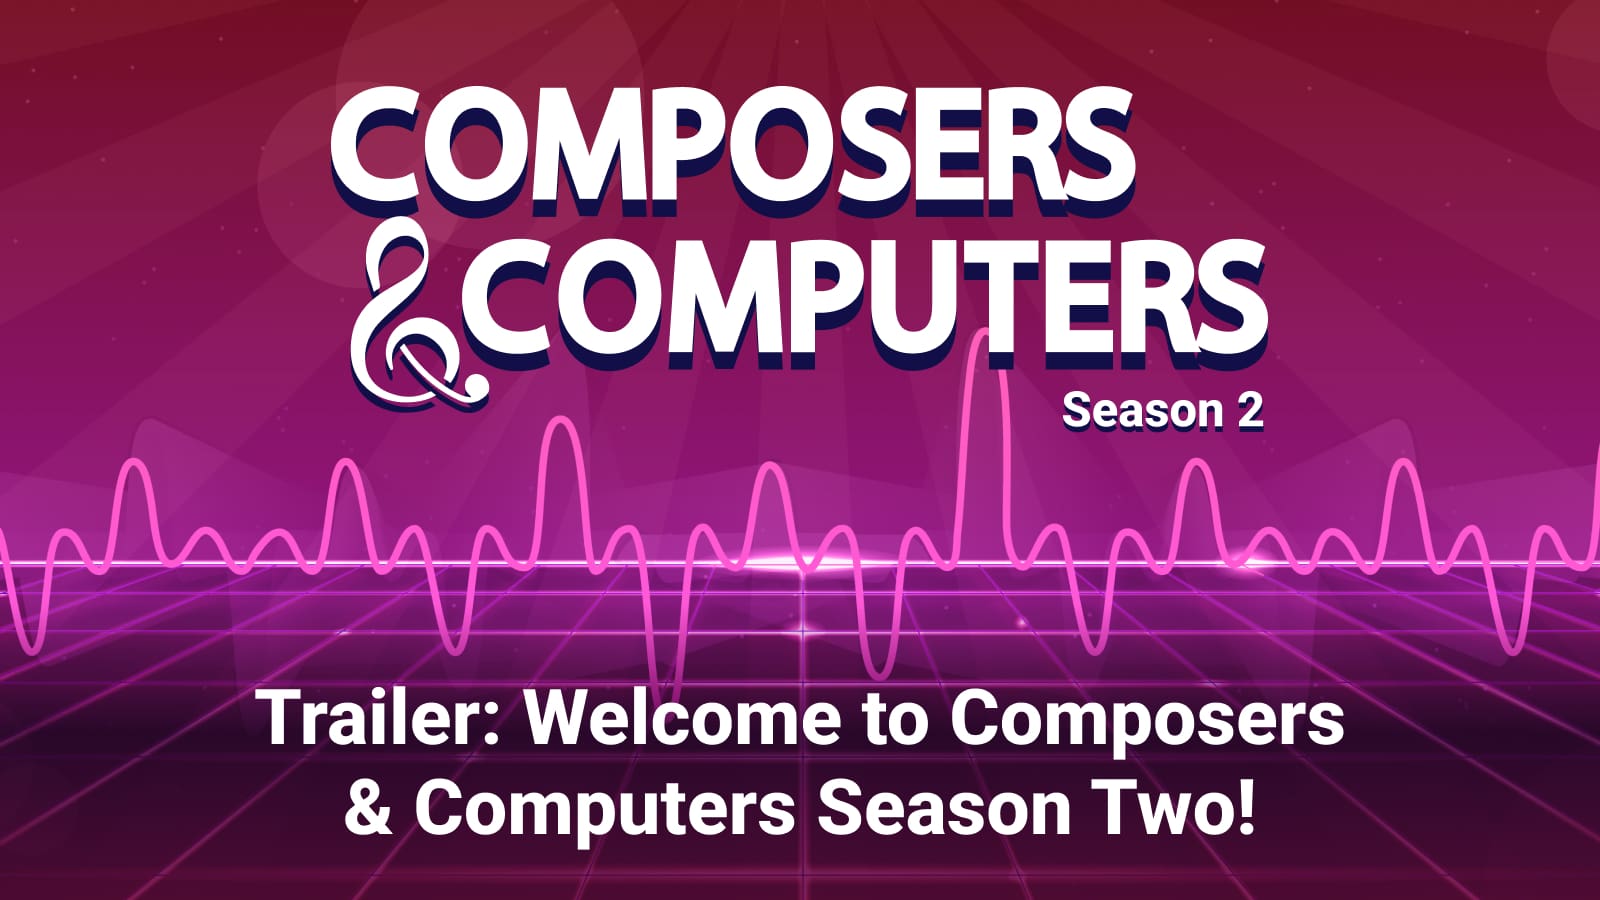 Composers & Computers logo, with ampersand as treble clef, and sound wave below. "Trailer: Welcome to Composers & Computers Season 2!"